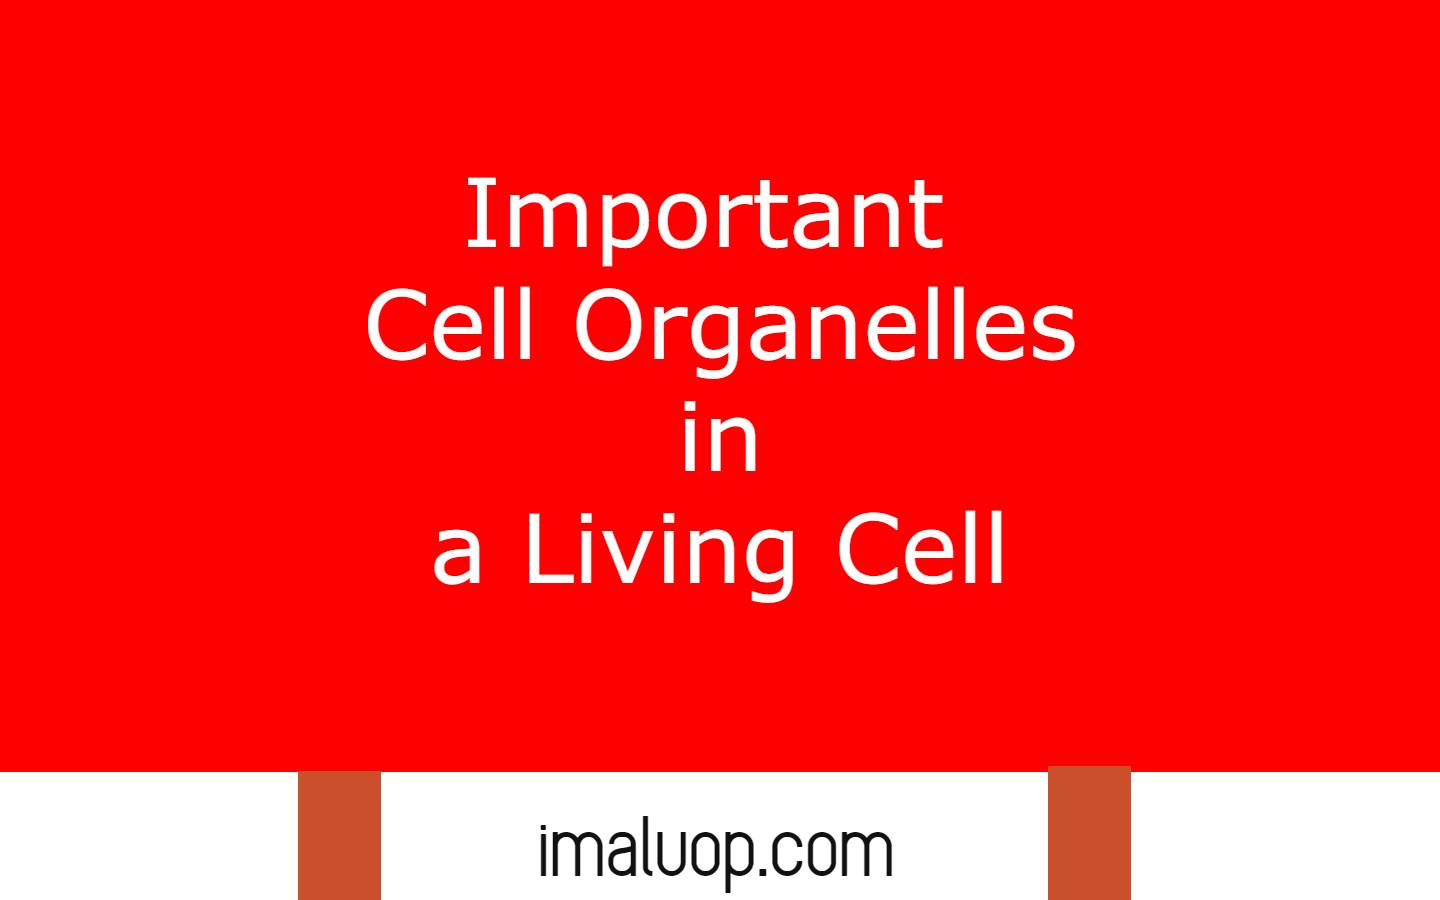 Important Cell Organelles in a Living Cell